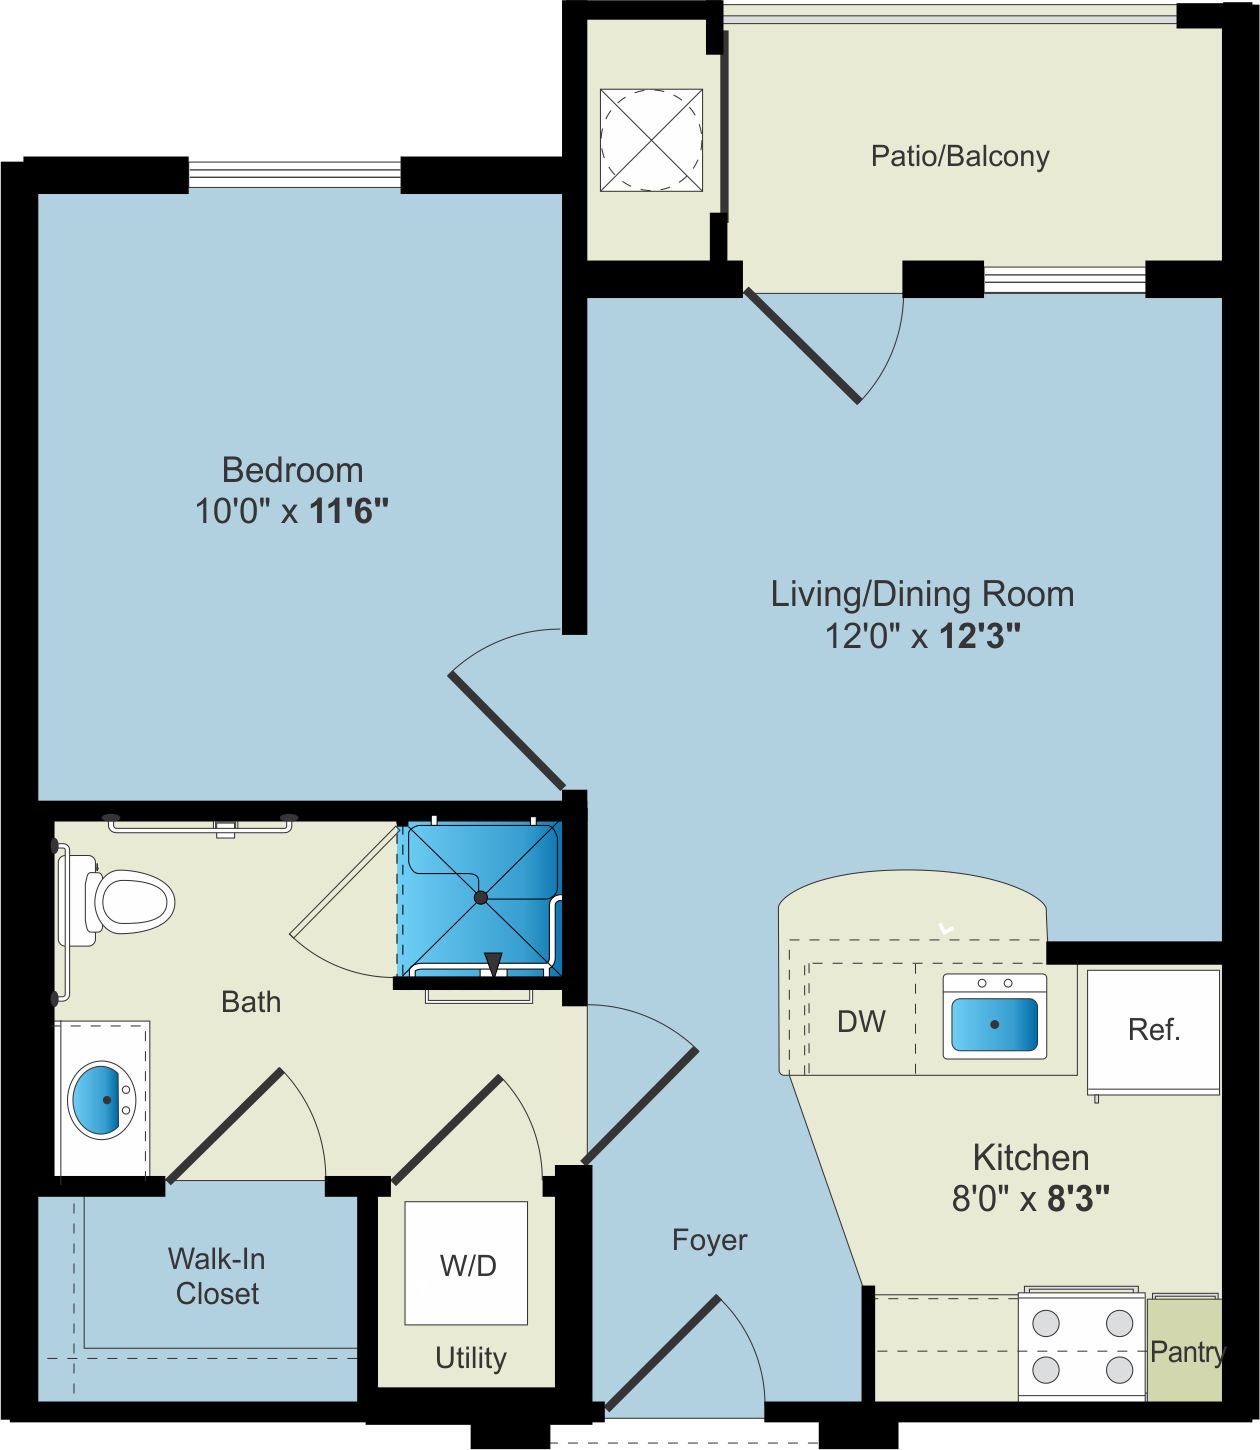 A floor plan for a one bedroom apartment in an apartment rental building.